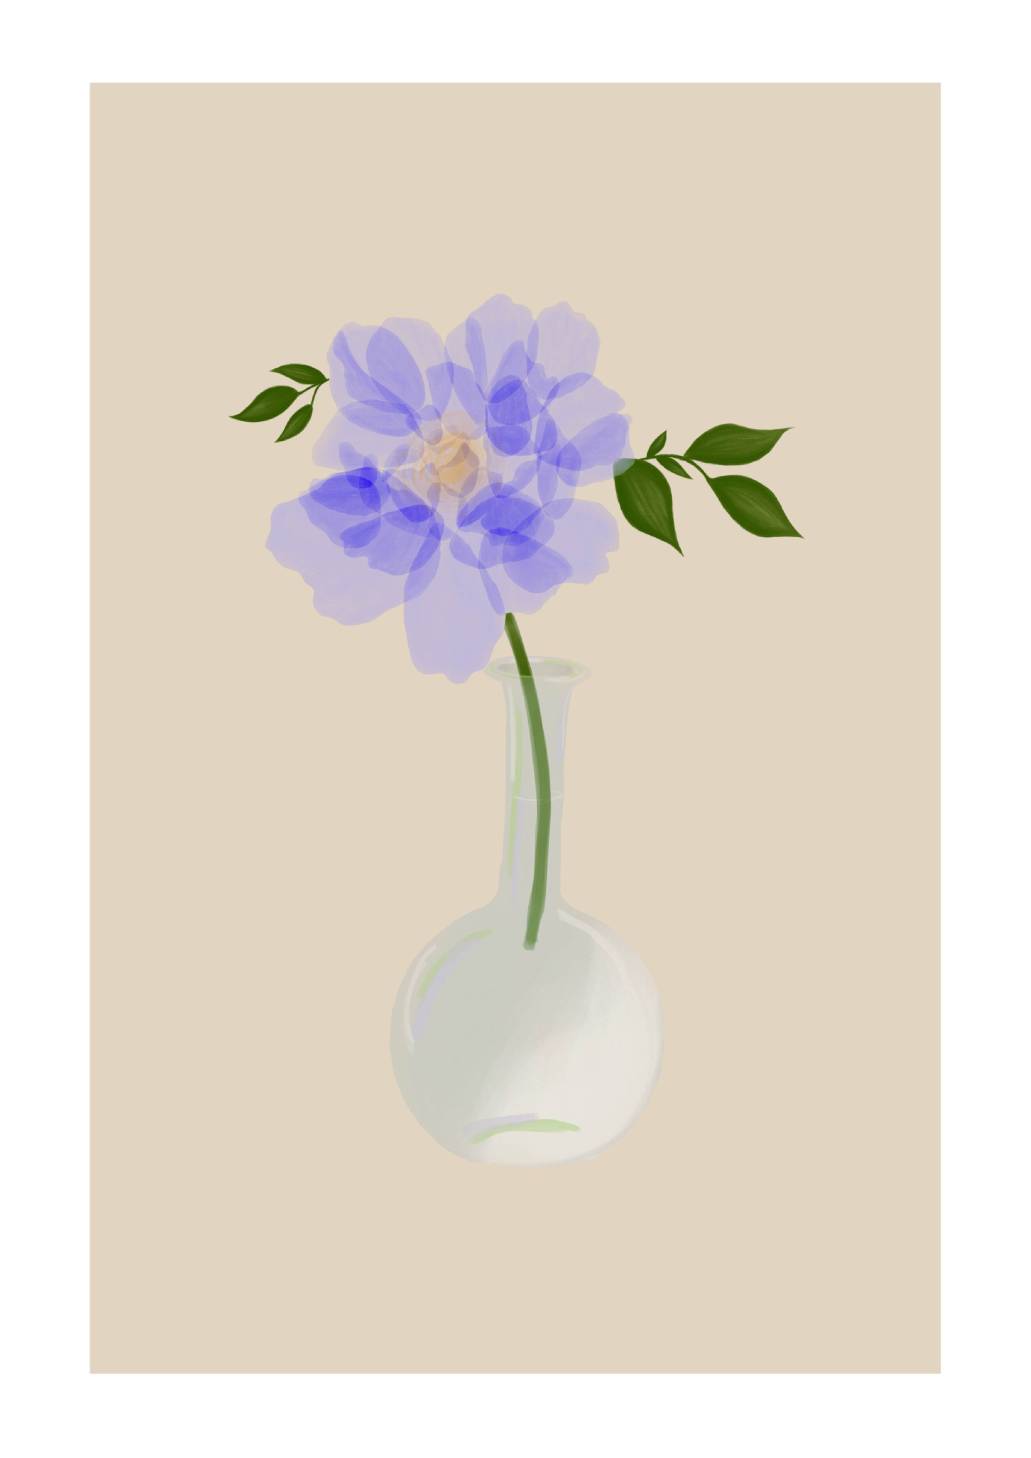 Lila_Blume_in_Vase_A3_rand